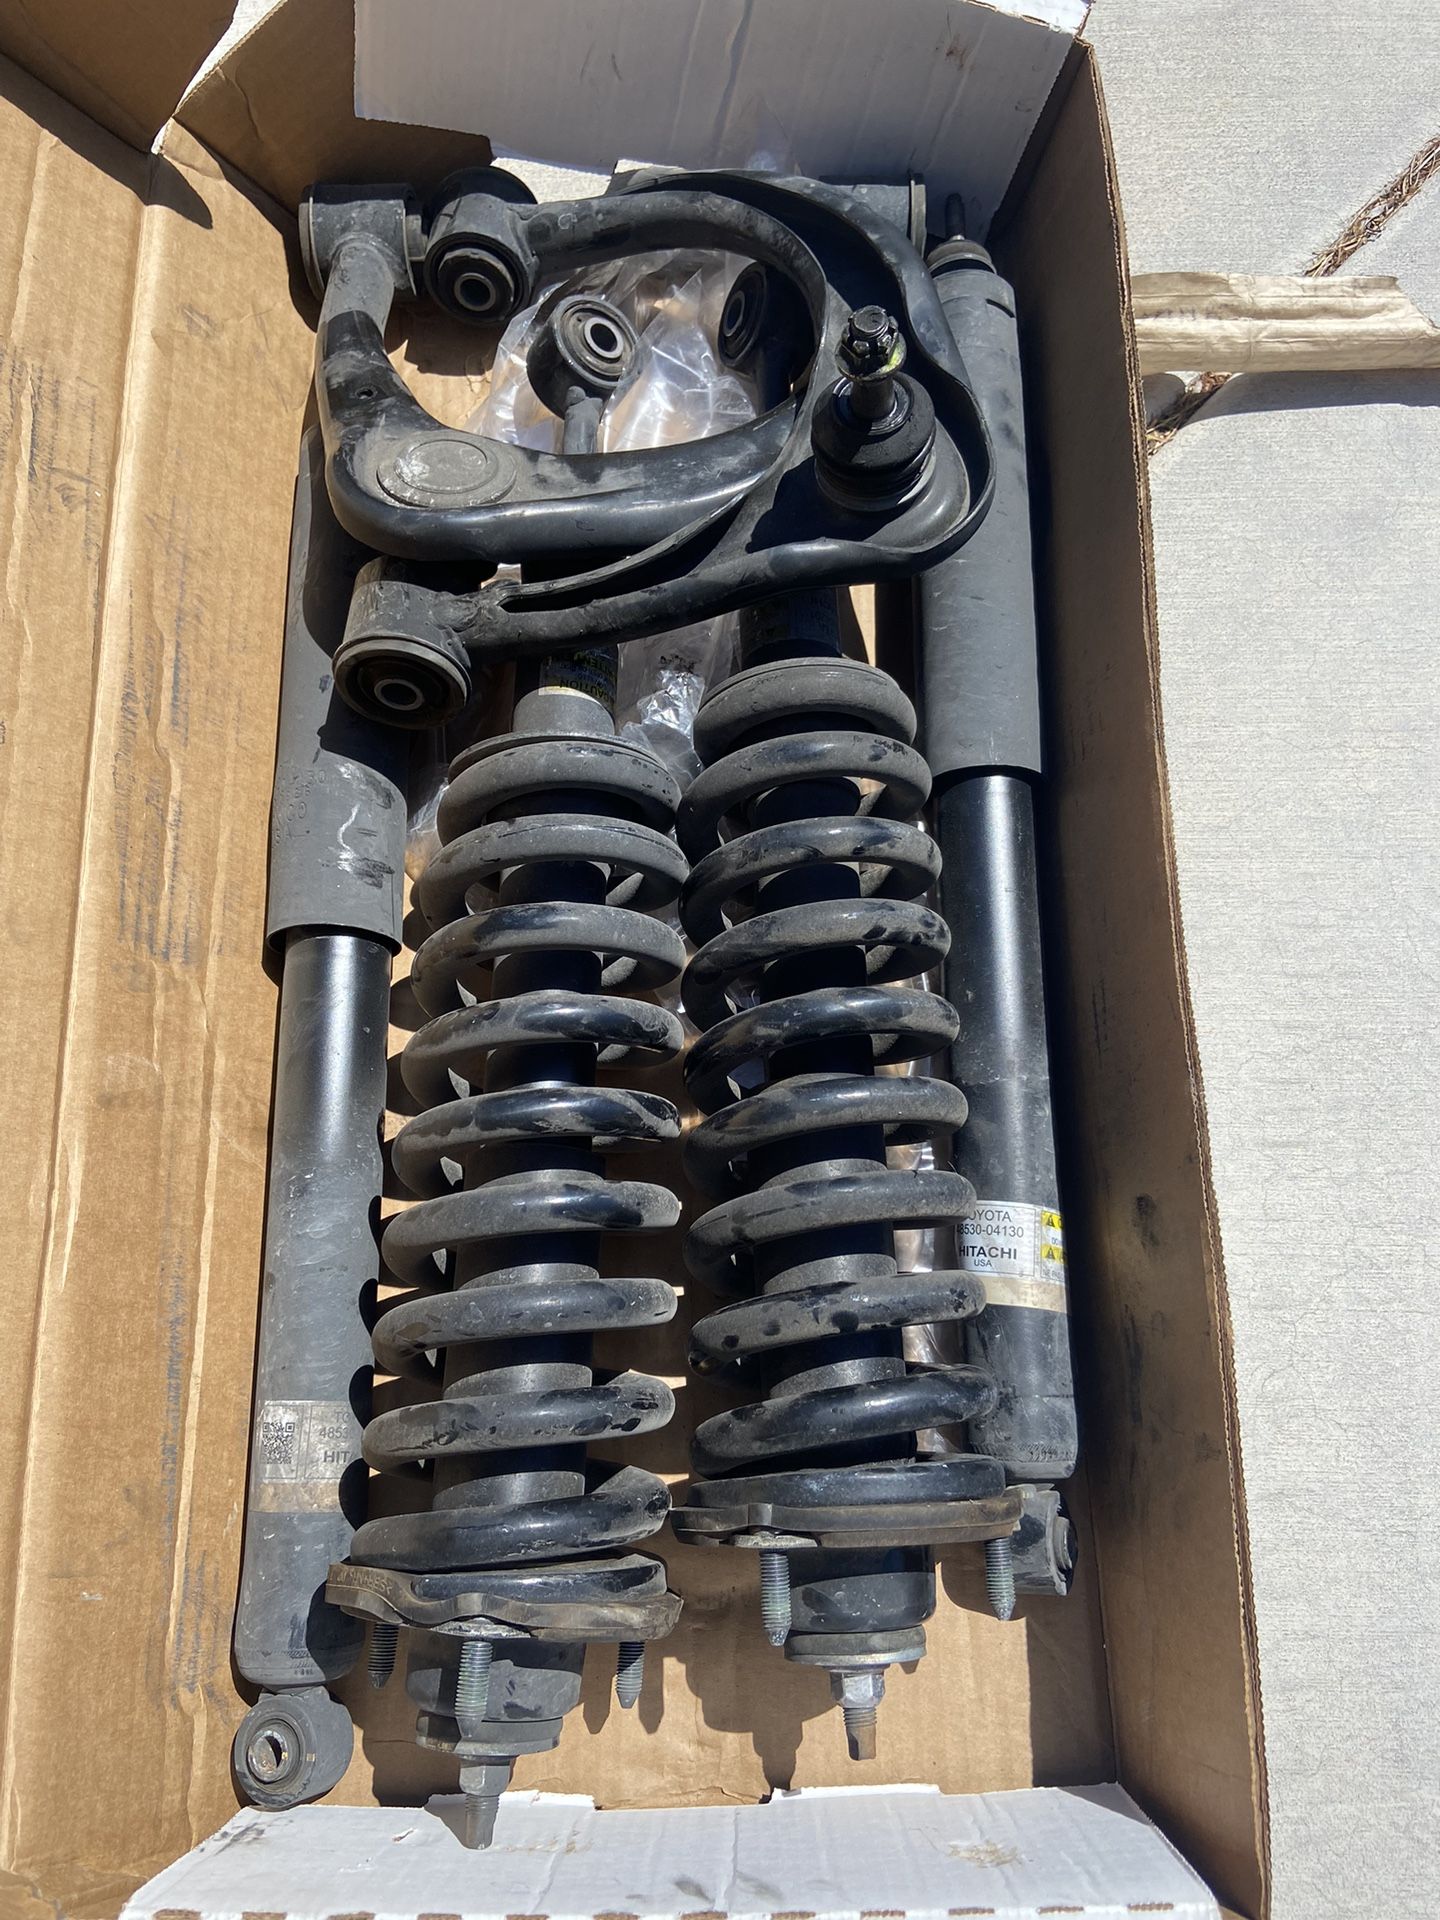 Tacoma OEM suspension components 